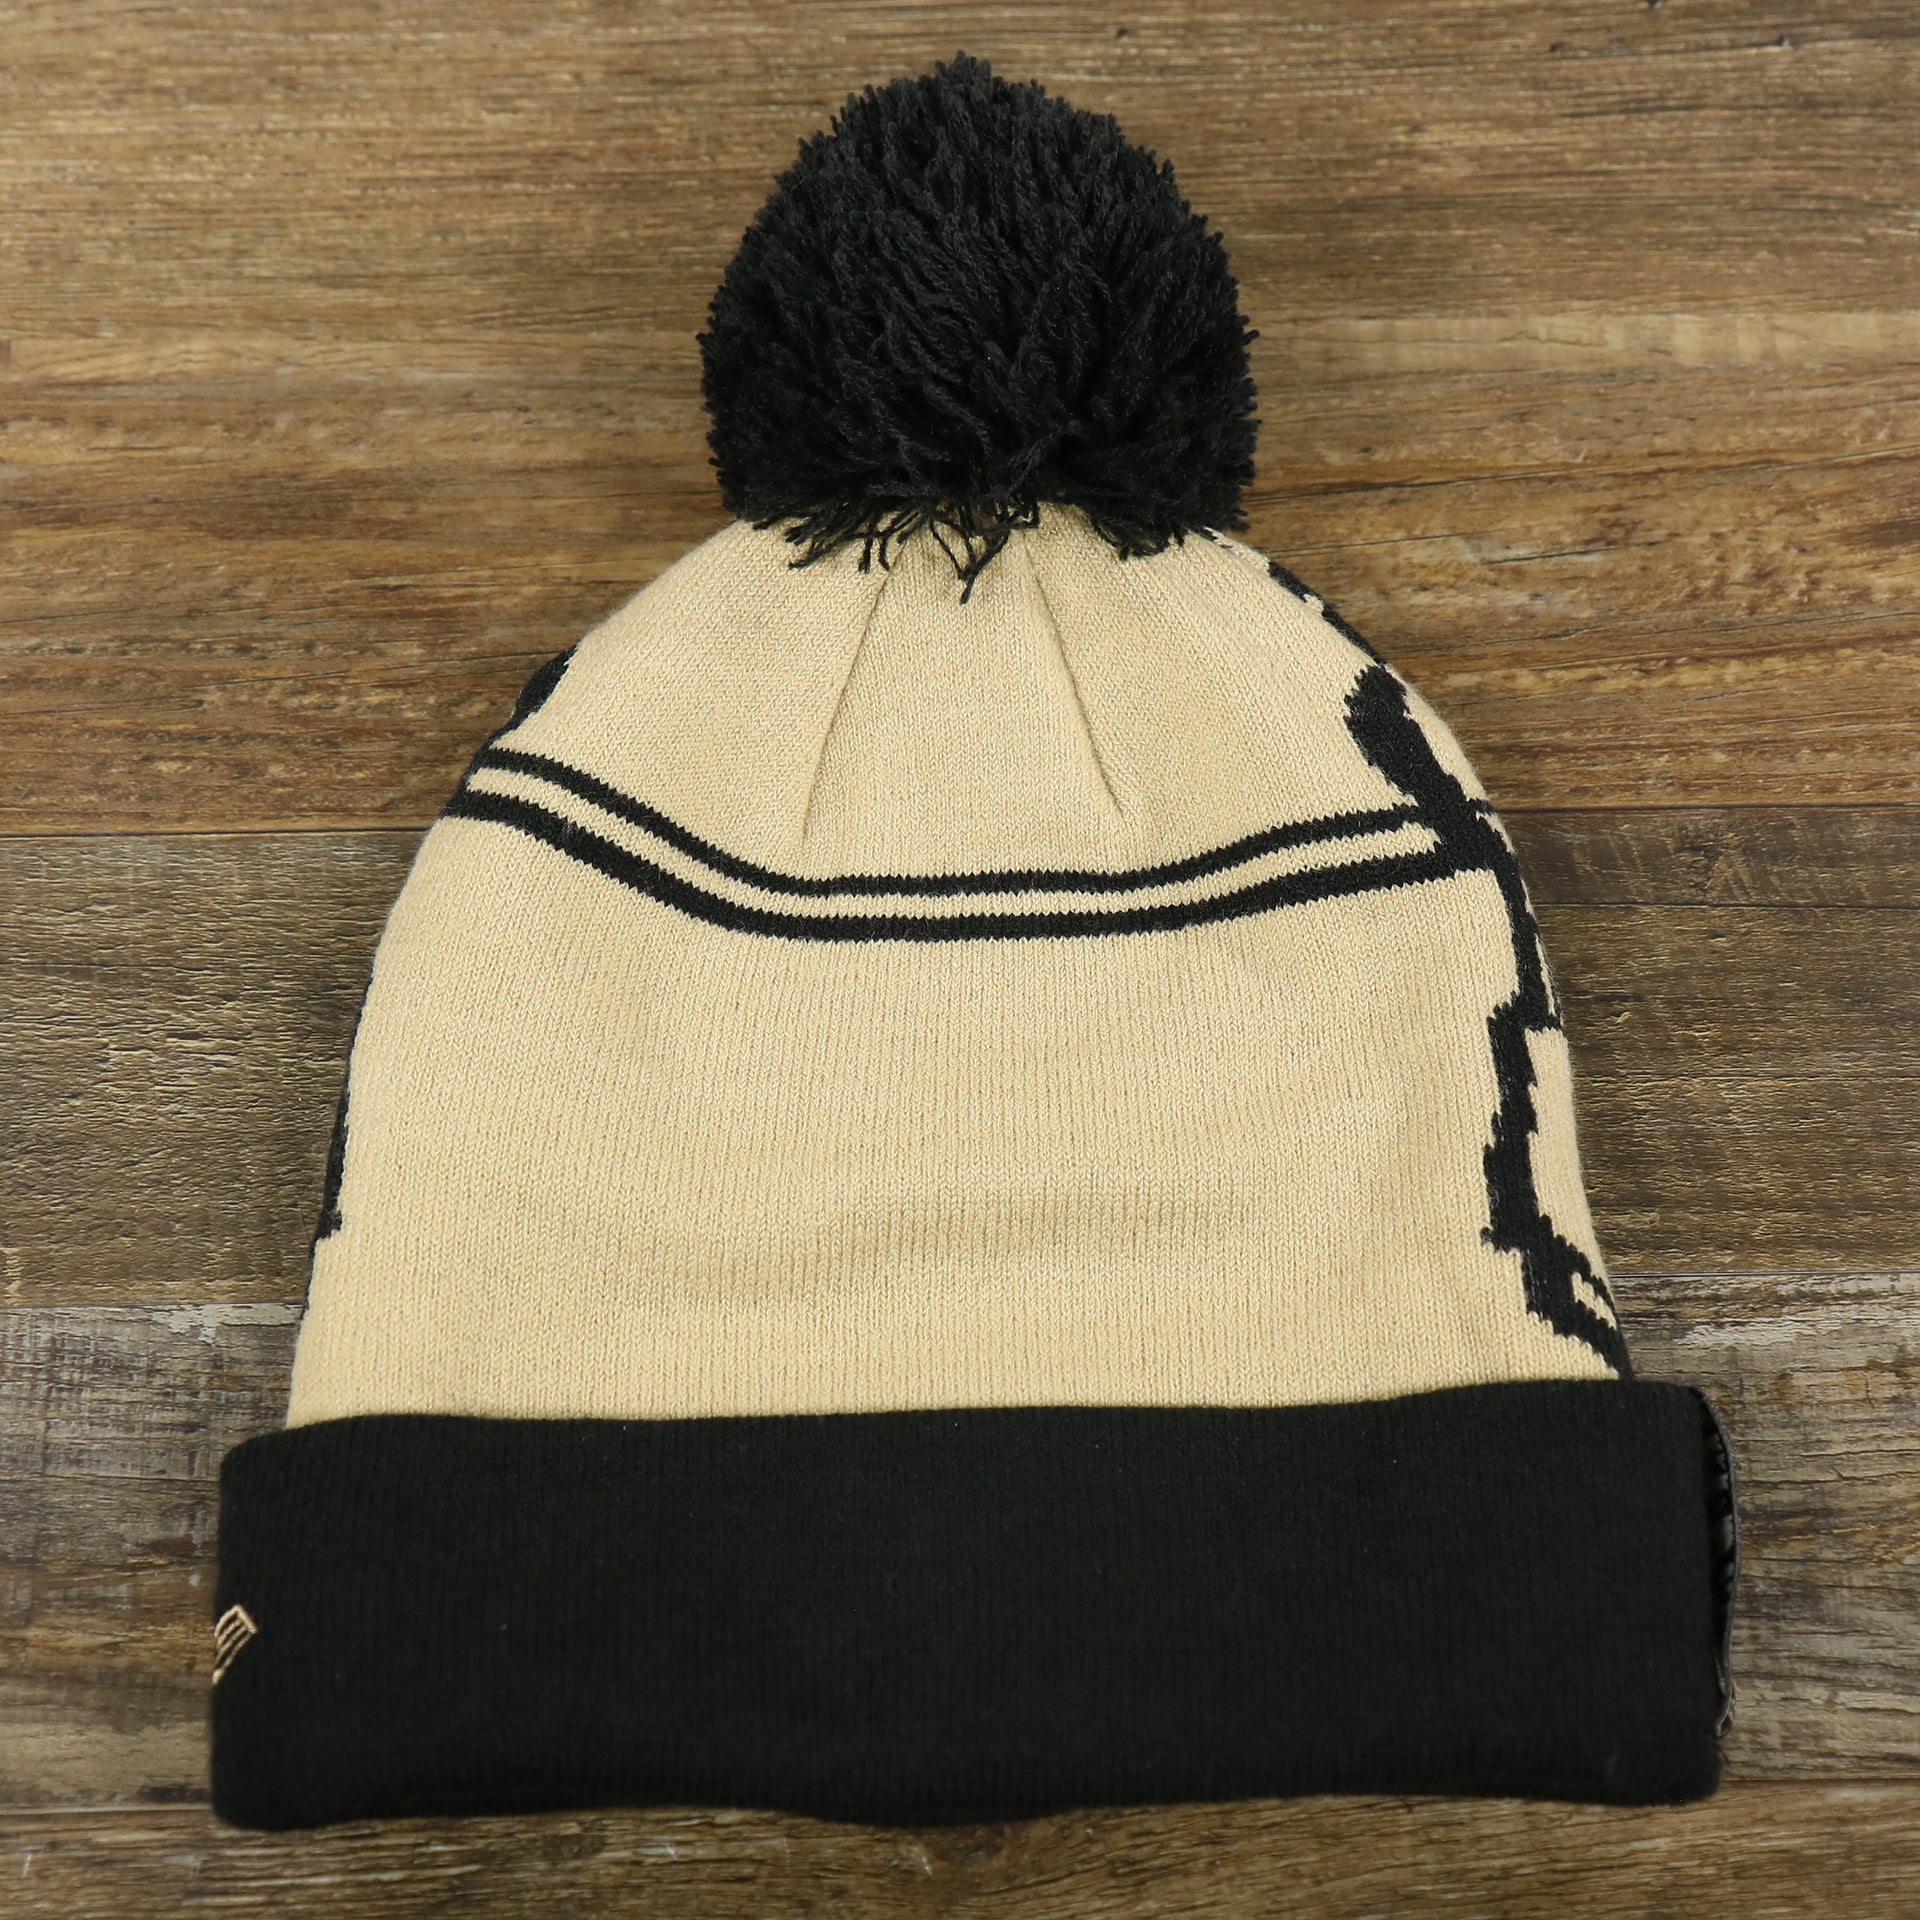 The backside of the Star War Sandtrooper Cuffed Beanie With Black Pom Pom | Tan And Black Beanie